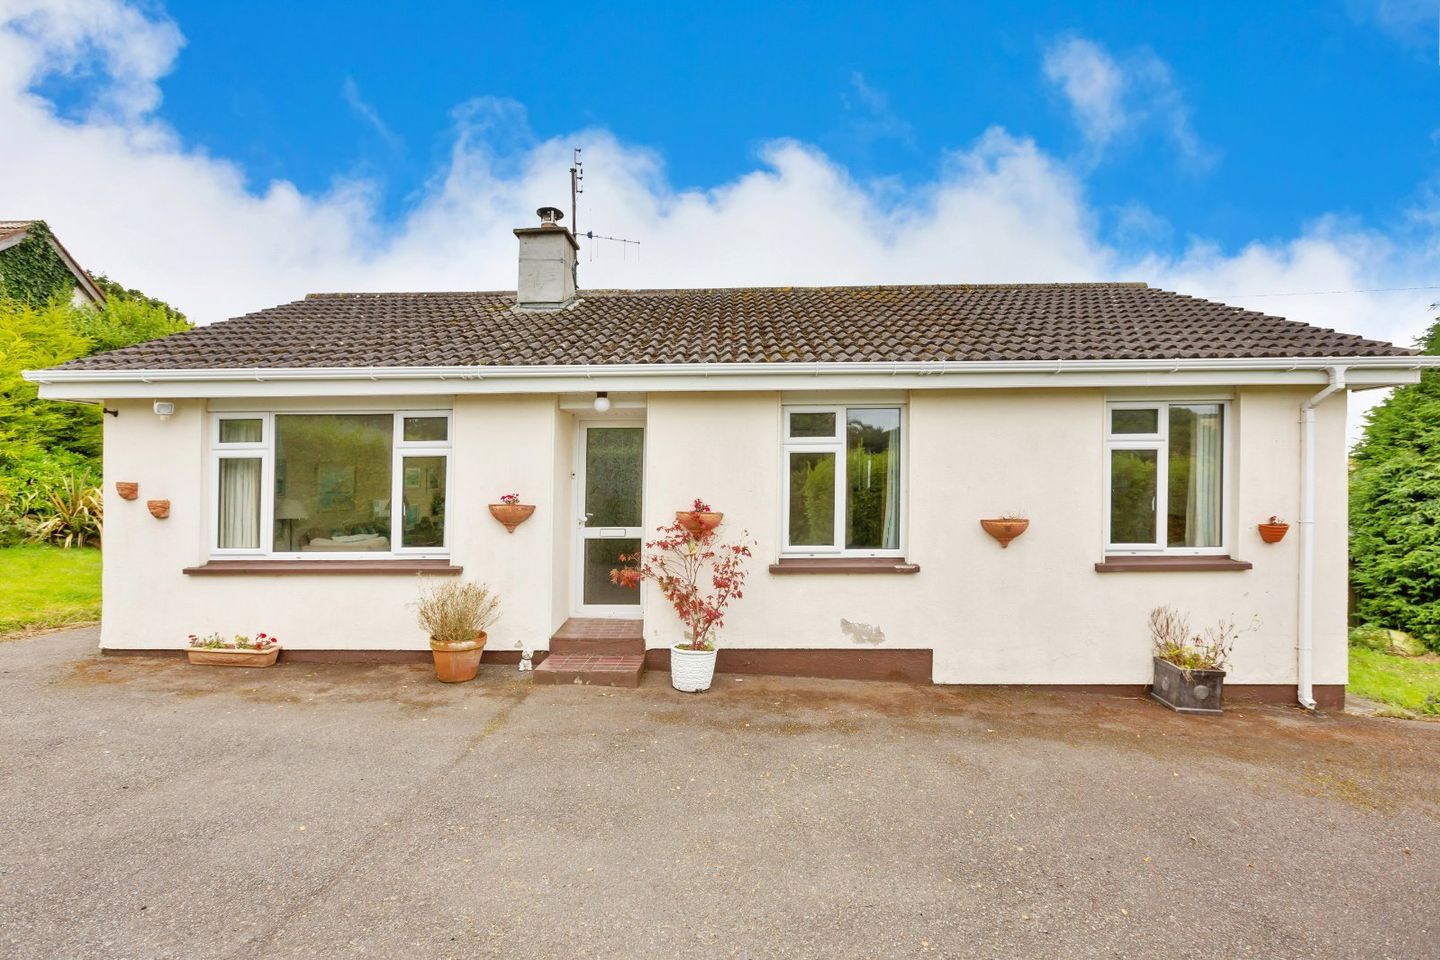 The Bungalow, Kilpoole Hill, Wicklow Town, Co. Wicklow, A67HN26